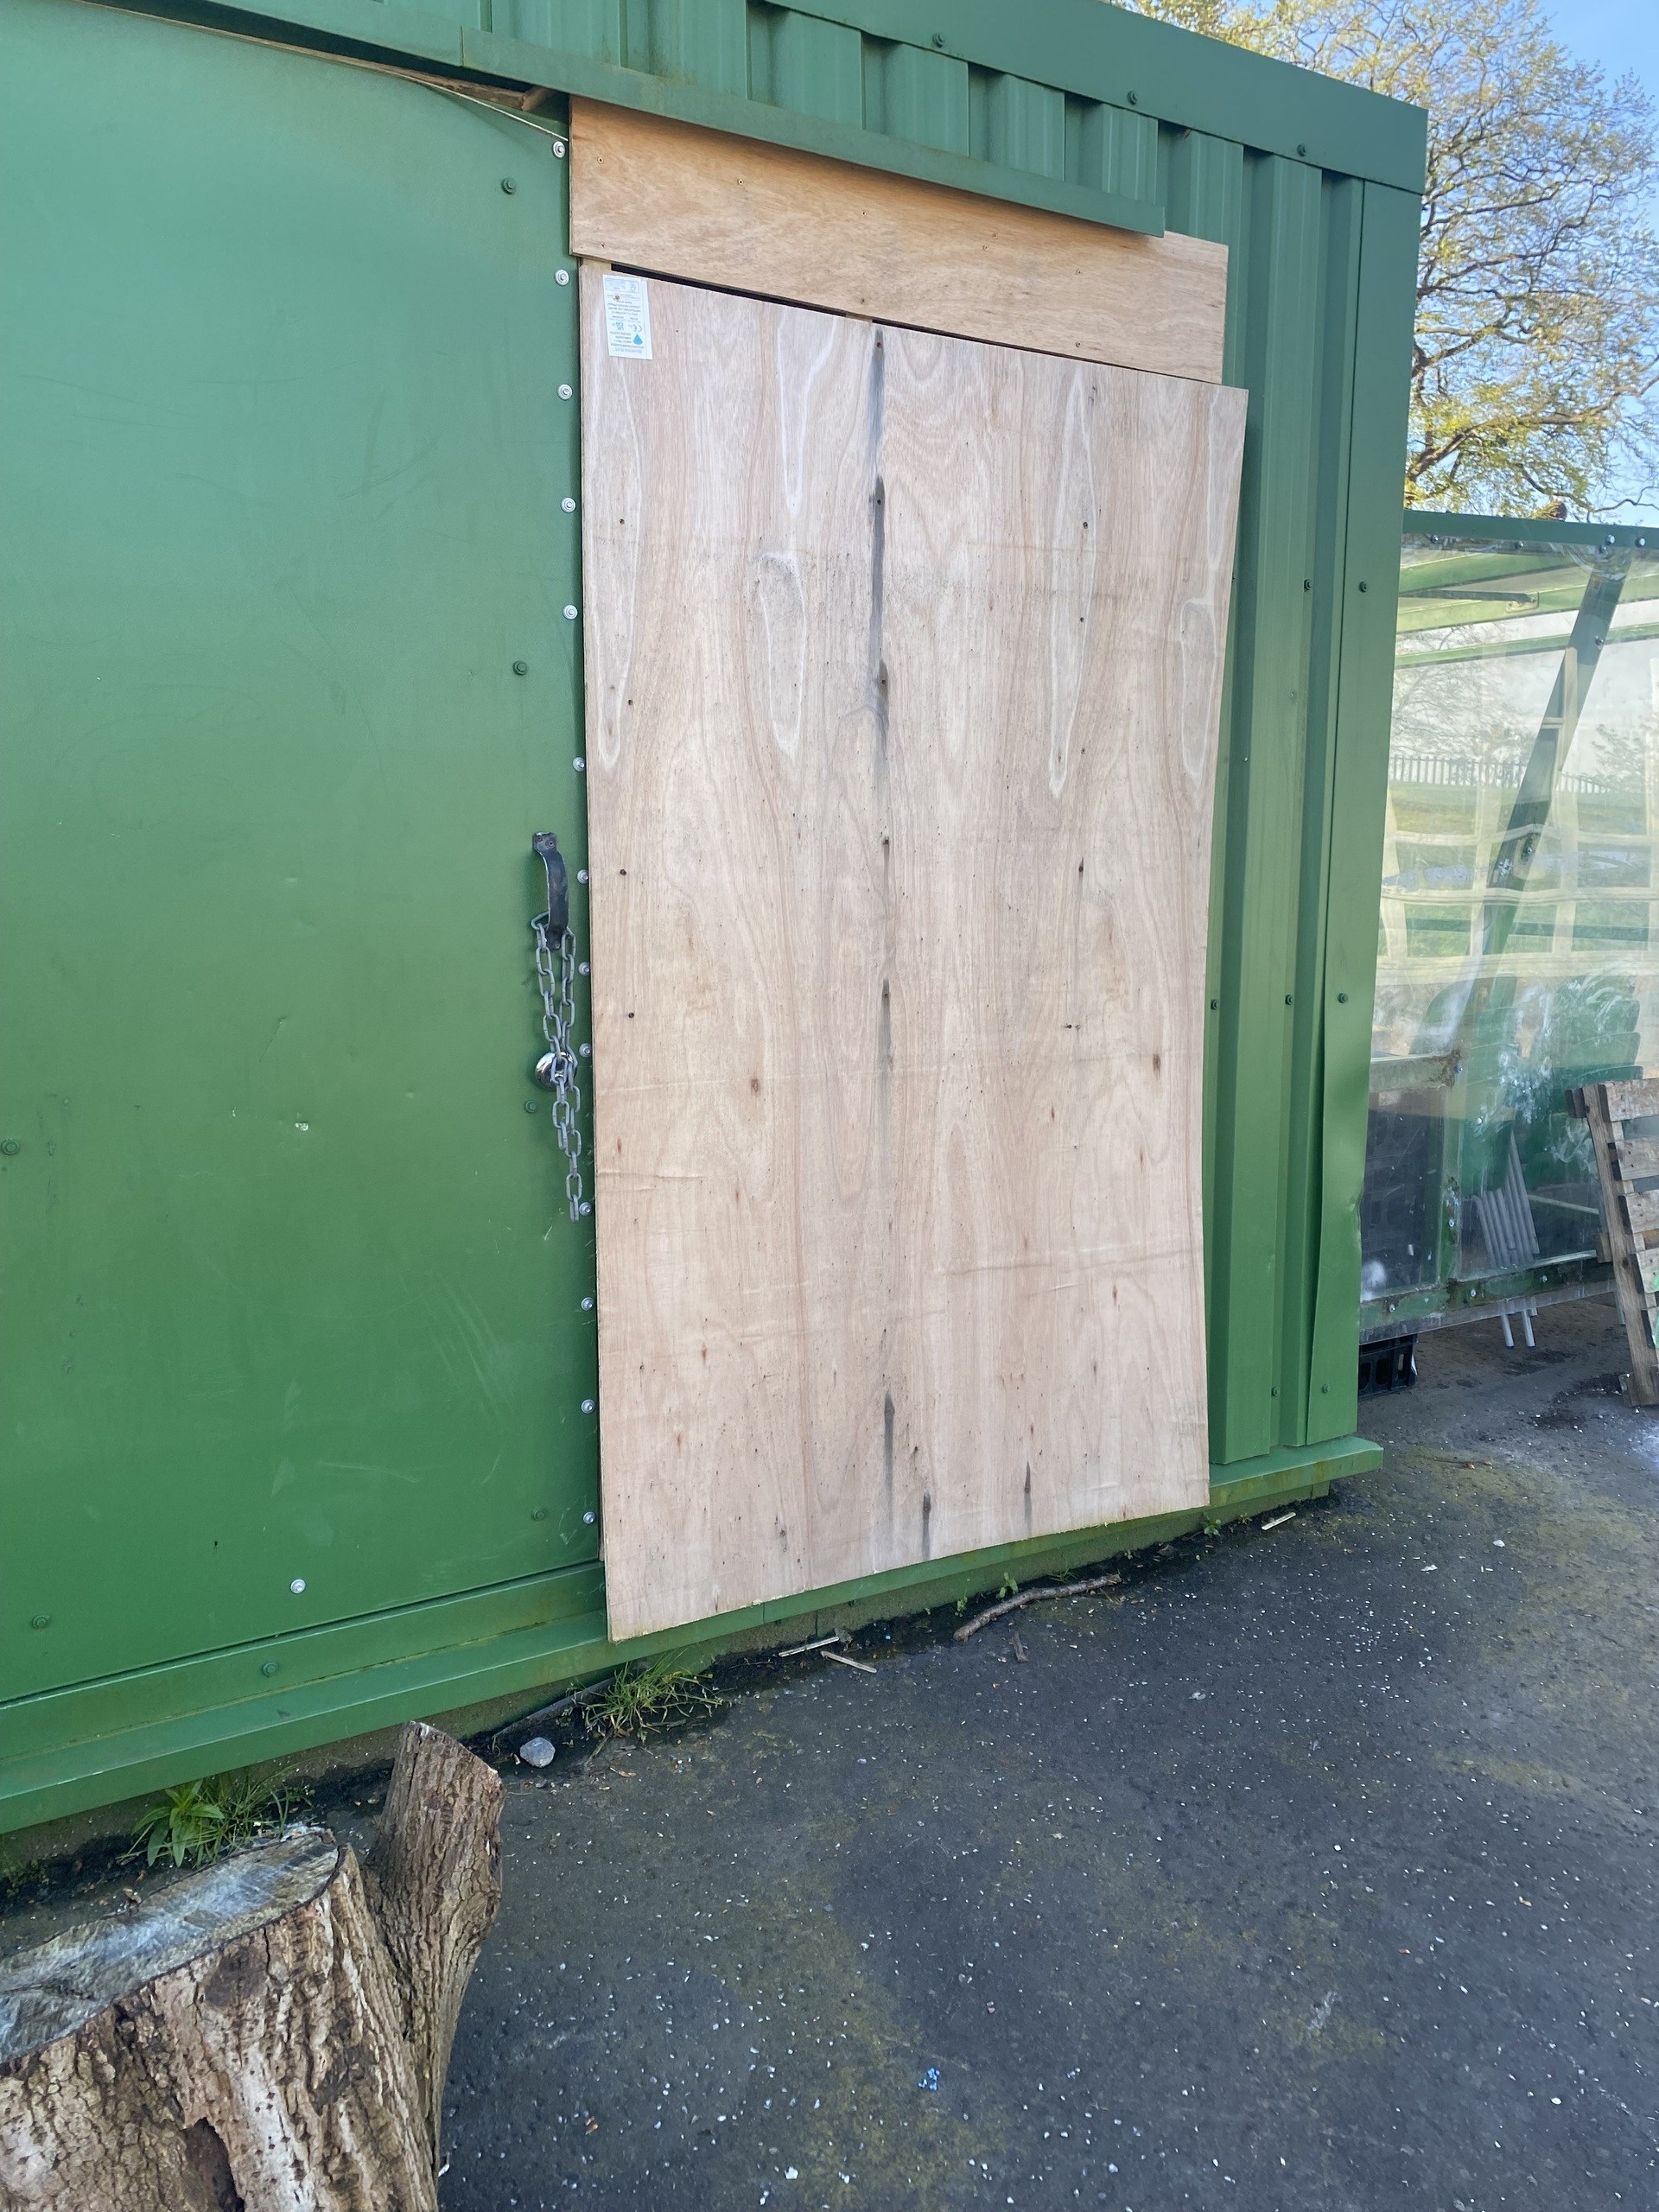 One of the sheds has been boarded up due to vandalism.